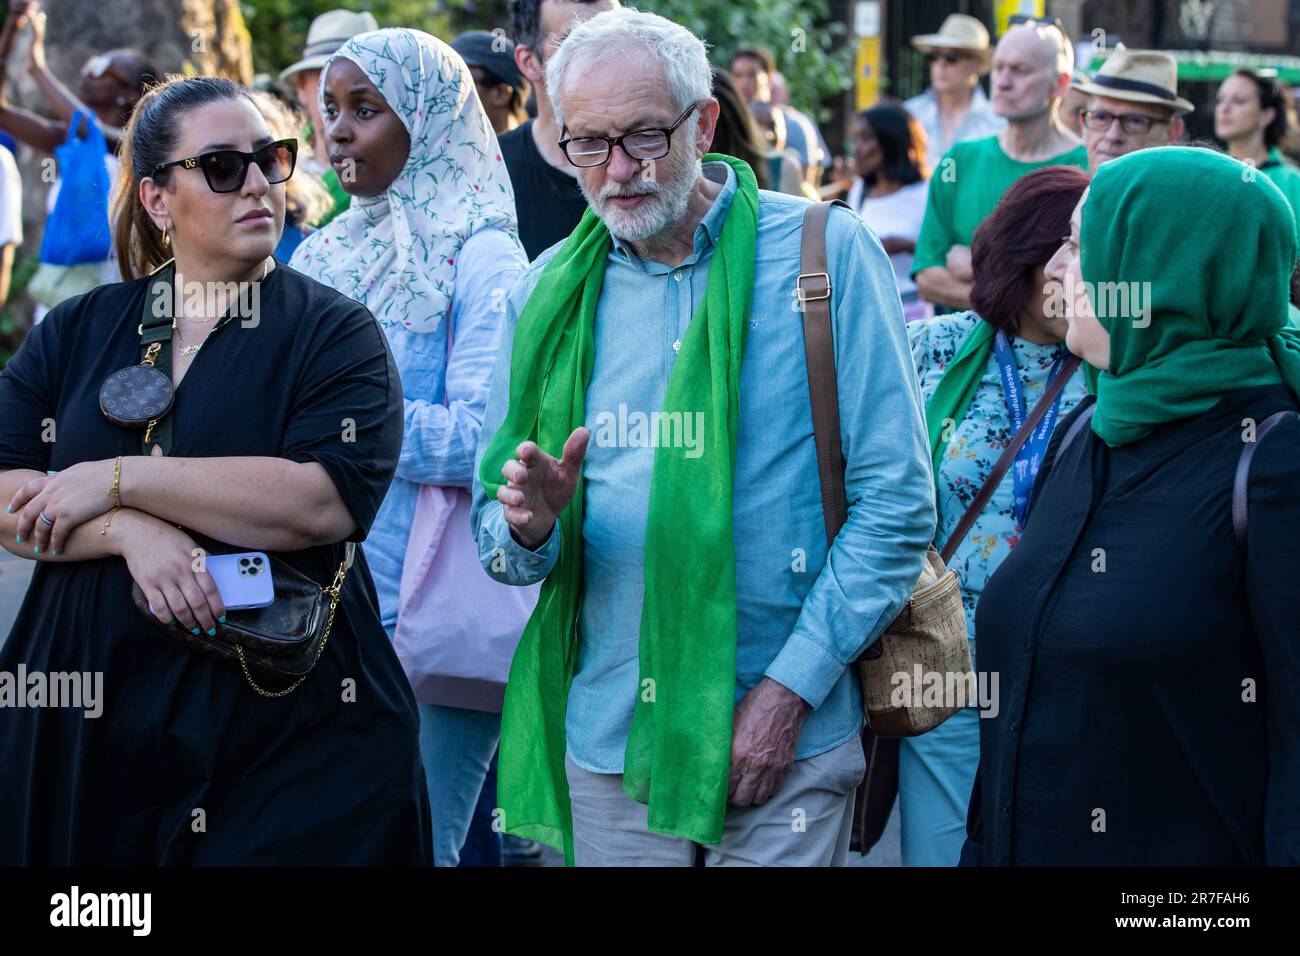 London, UK. 14th June, 2023. Jeremy Corbyn, MP for Islington North, accompanies members of the Grenfell community on the Grenfell Silent Walk around West Kensington. The event was organised to mark the sixth anniversary of the Grenfell Tower fire on 14 June 2017 as a result of which 72 people died and over 70 were injured. The Grenfell Tower Inquiry concluded in November 2022 that all the deaths in the fire were avoidable but no criminal prosecutions have yet been brought. Credit: Mark Kerrison/Alamy Live News Stock Photo